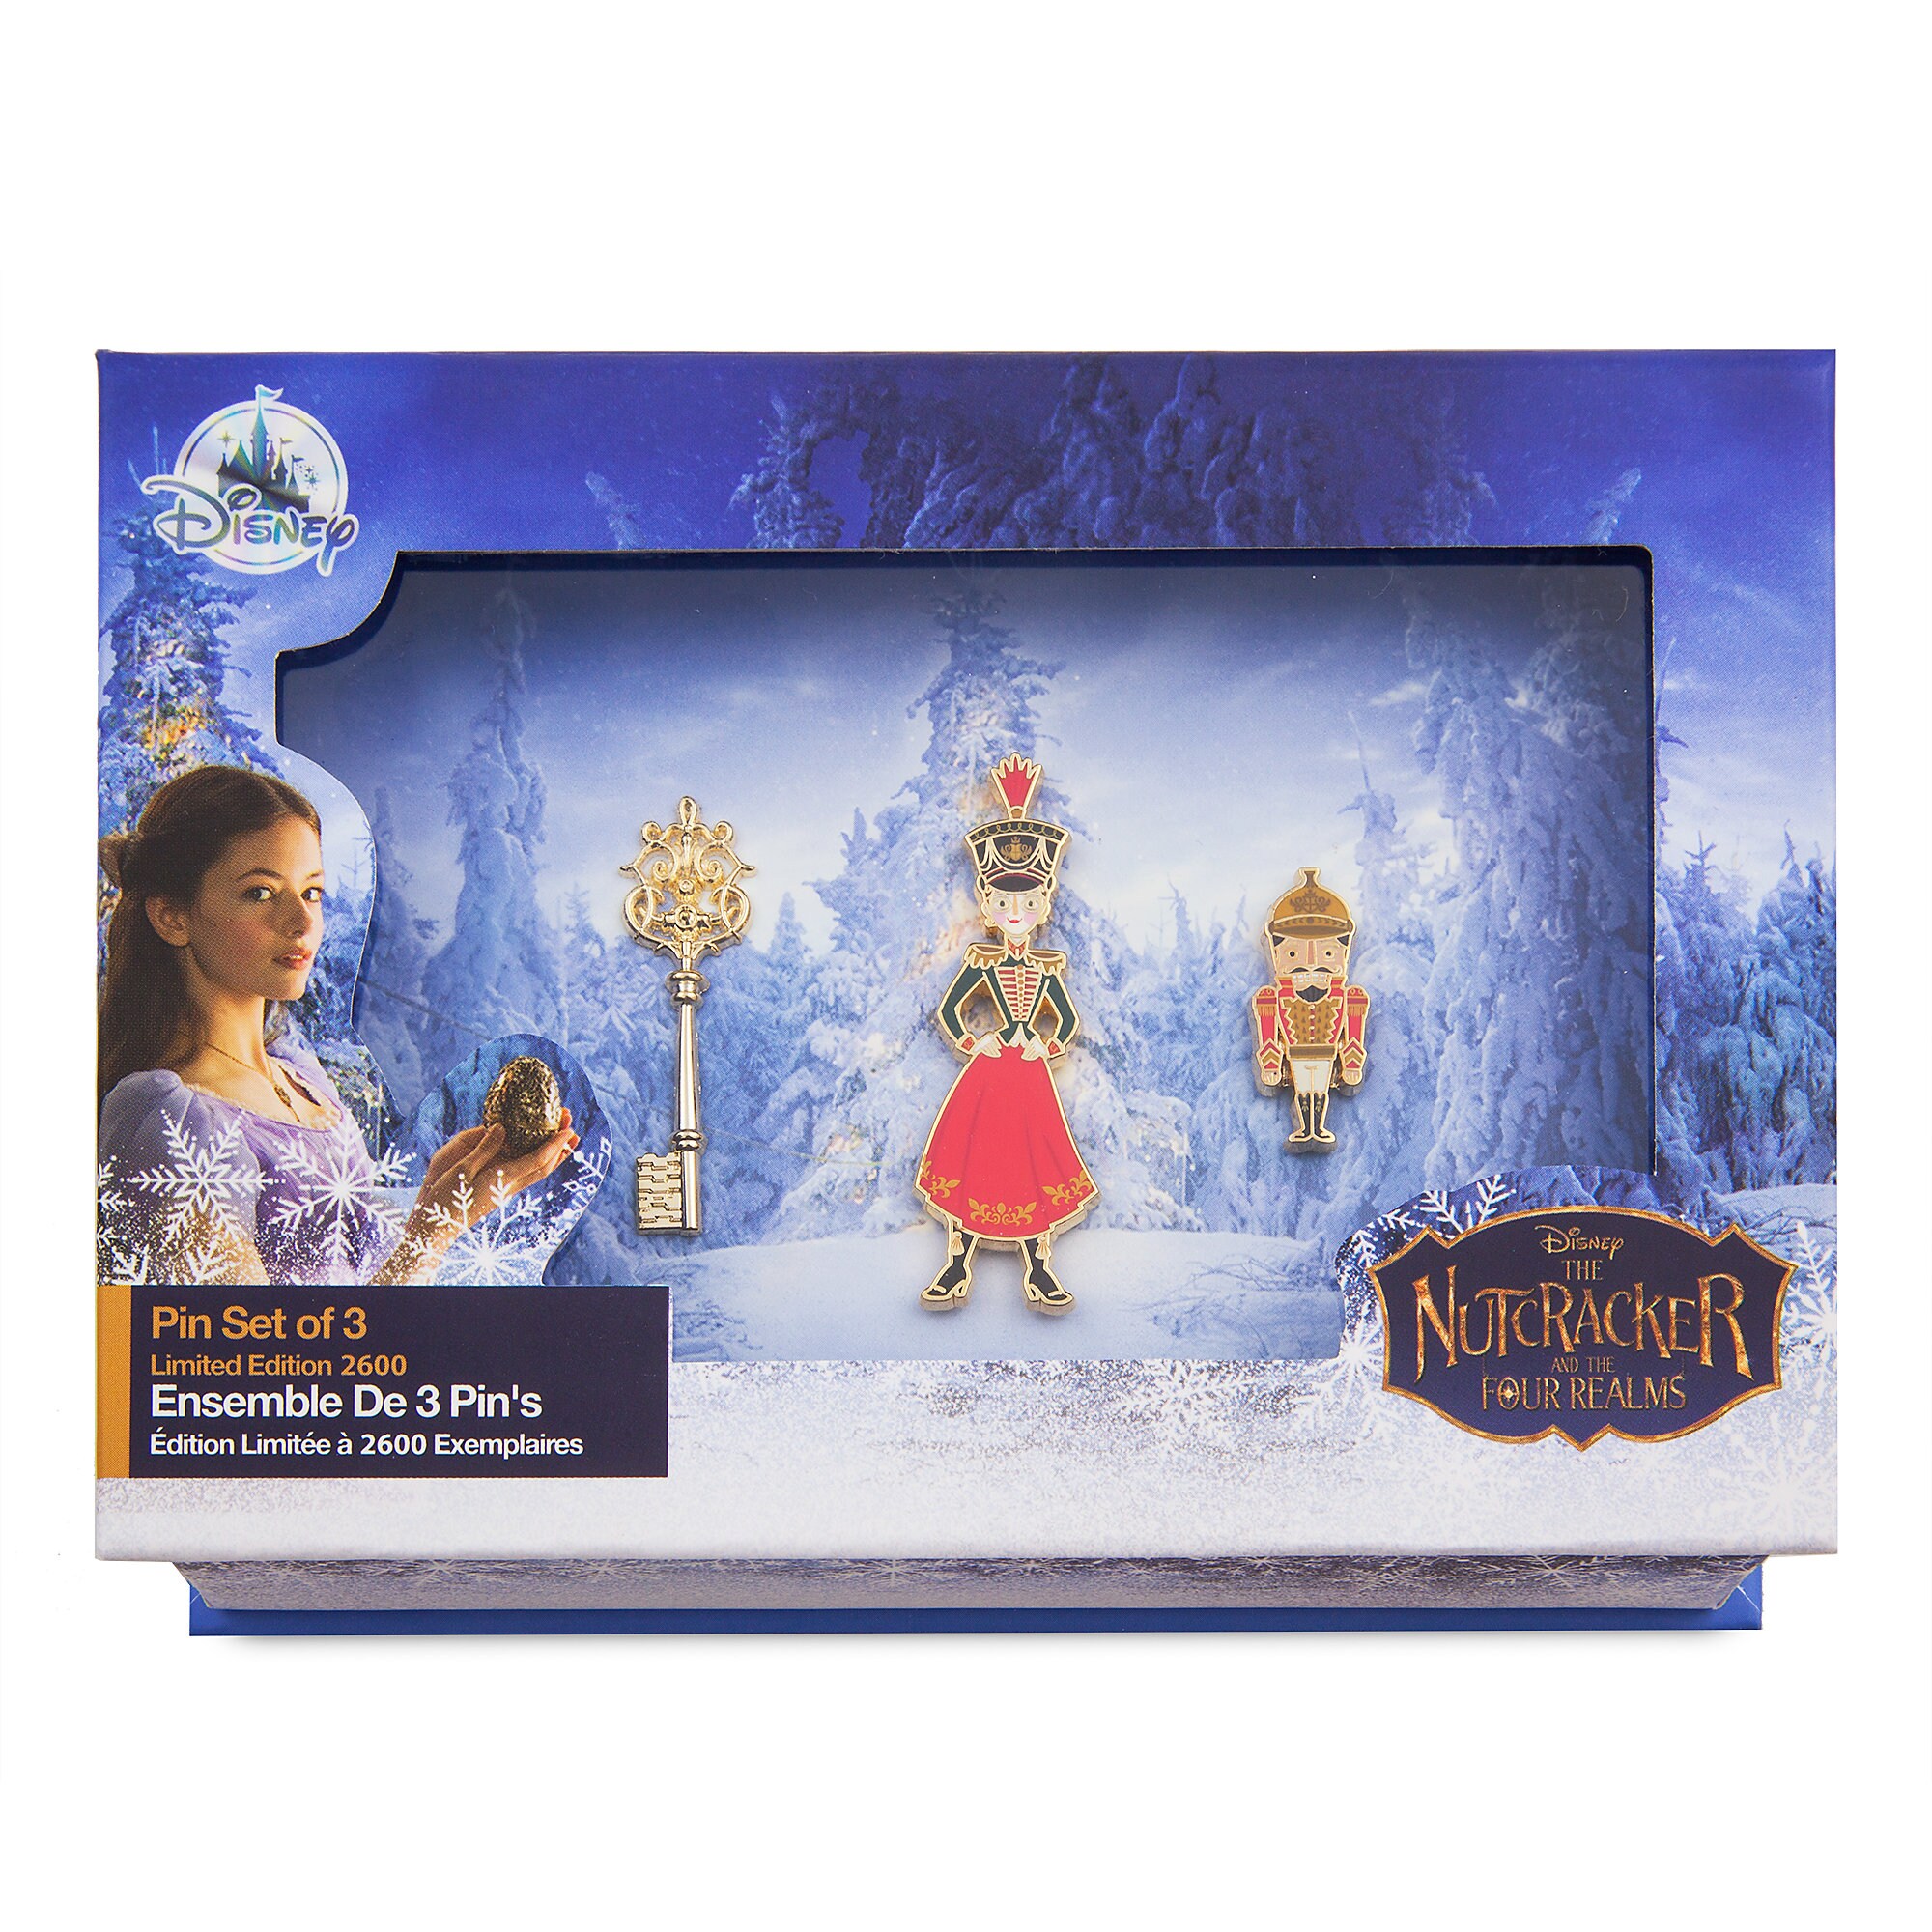 The Nutcracker and the Four Realms Limited Edition Pin Set